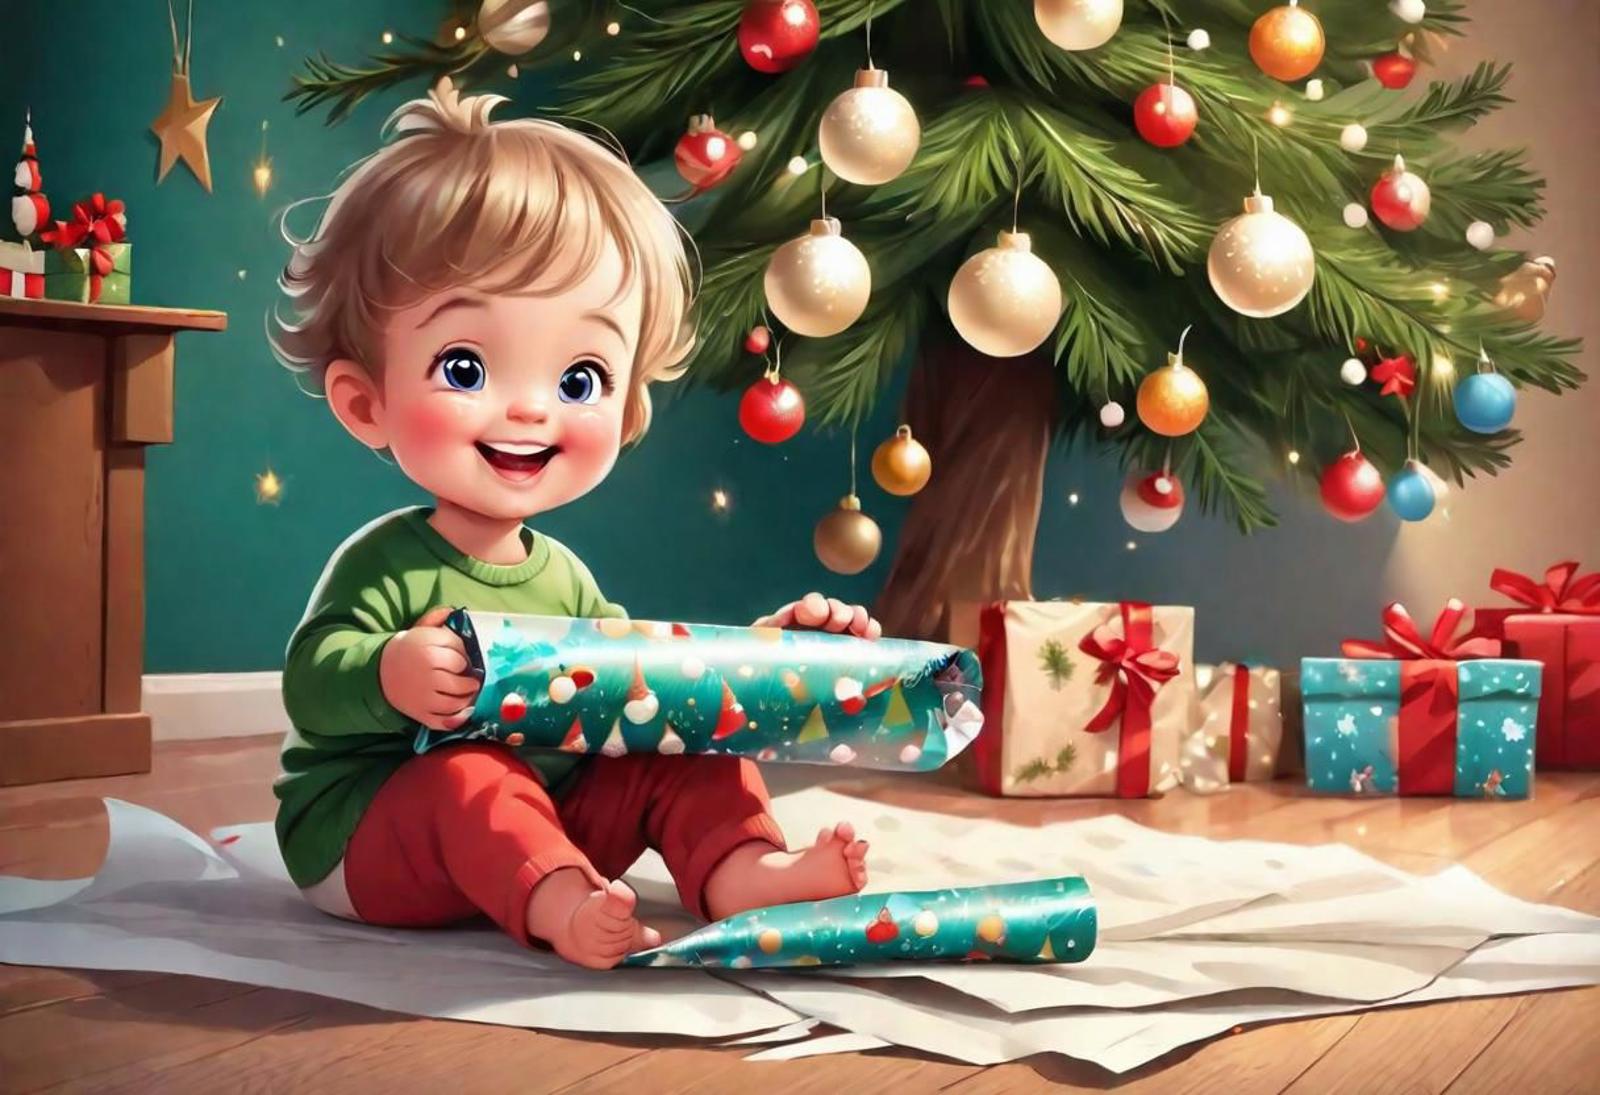 A young boy sitting on the floor in front of a Christmas tree, holding a present.